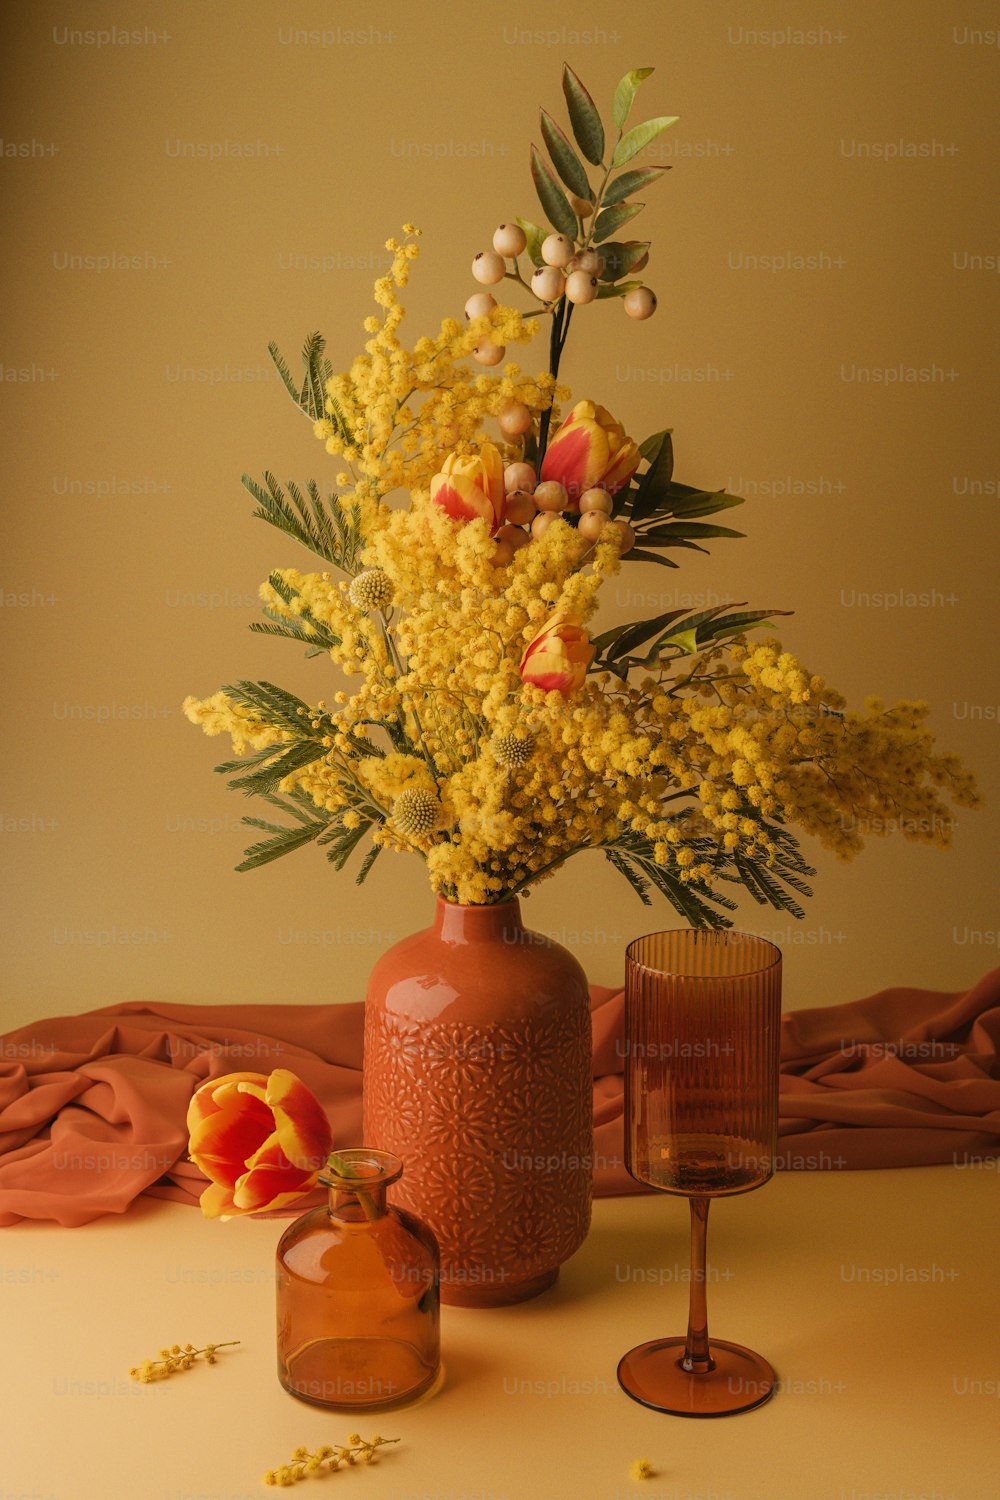 a vase filled with yellow flowers next to a wine glass